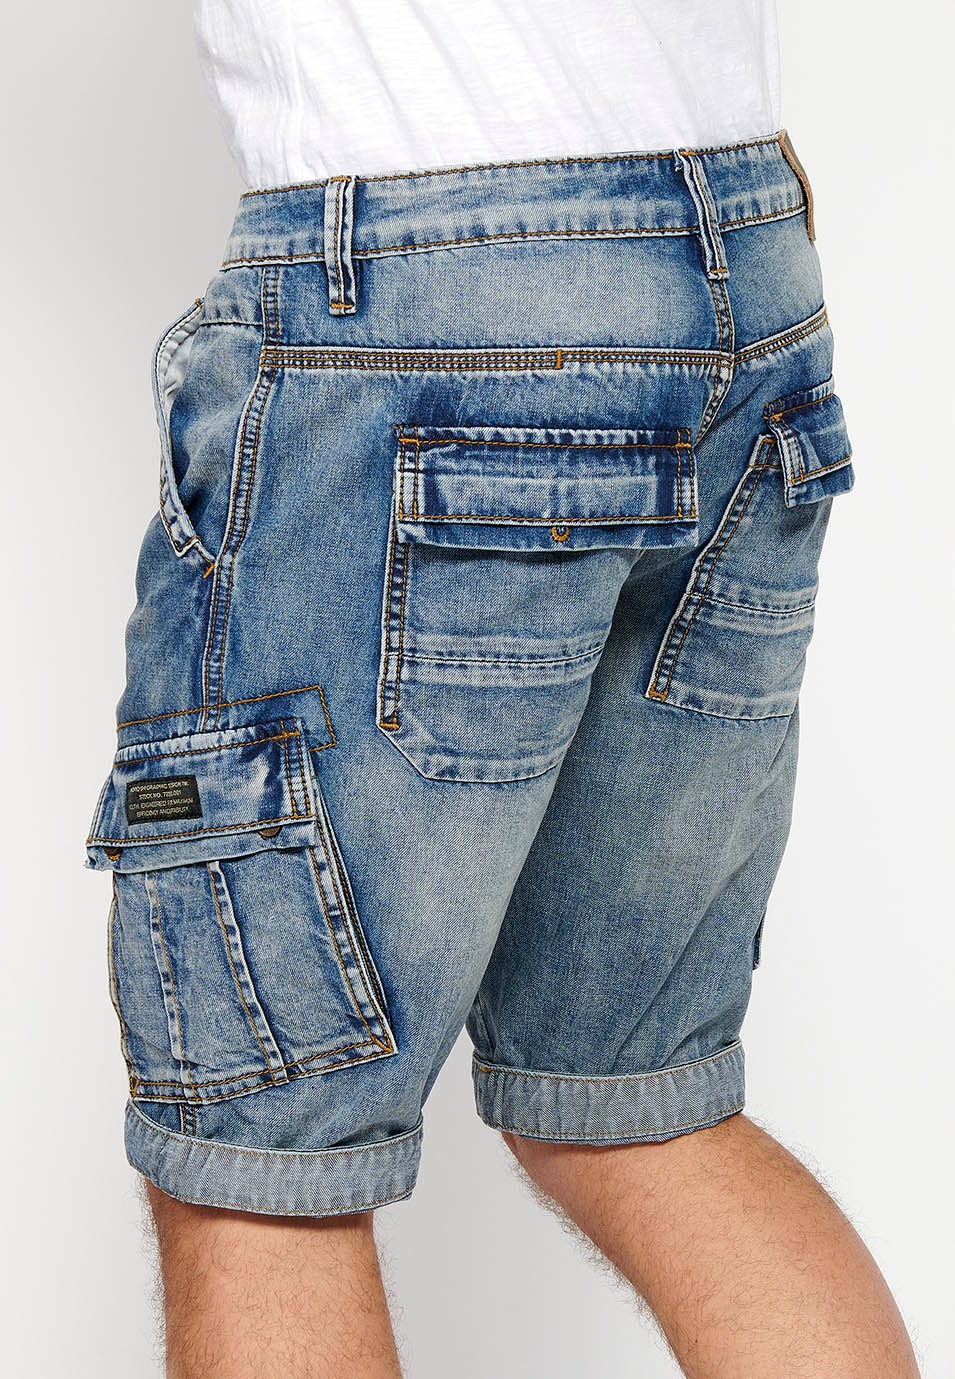 Denim Bermuda cargo shorts with front zipper and button closure with five pockets, one blue pocket pocket for Men 4